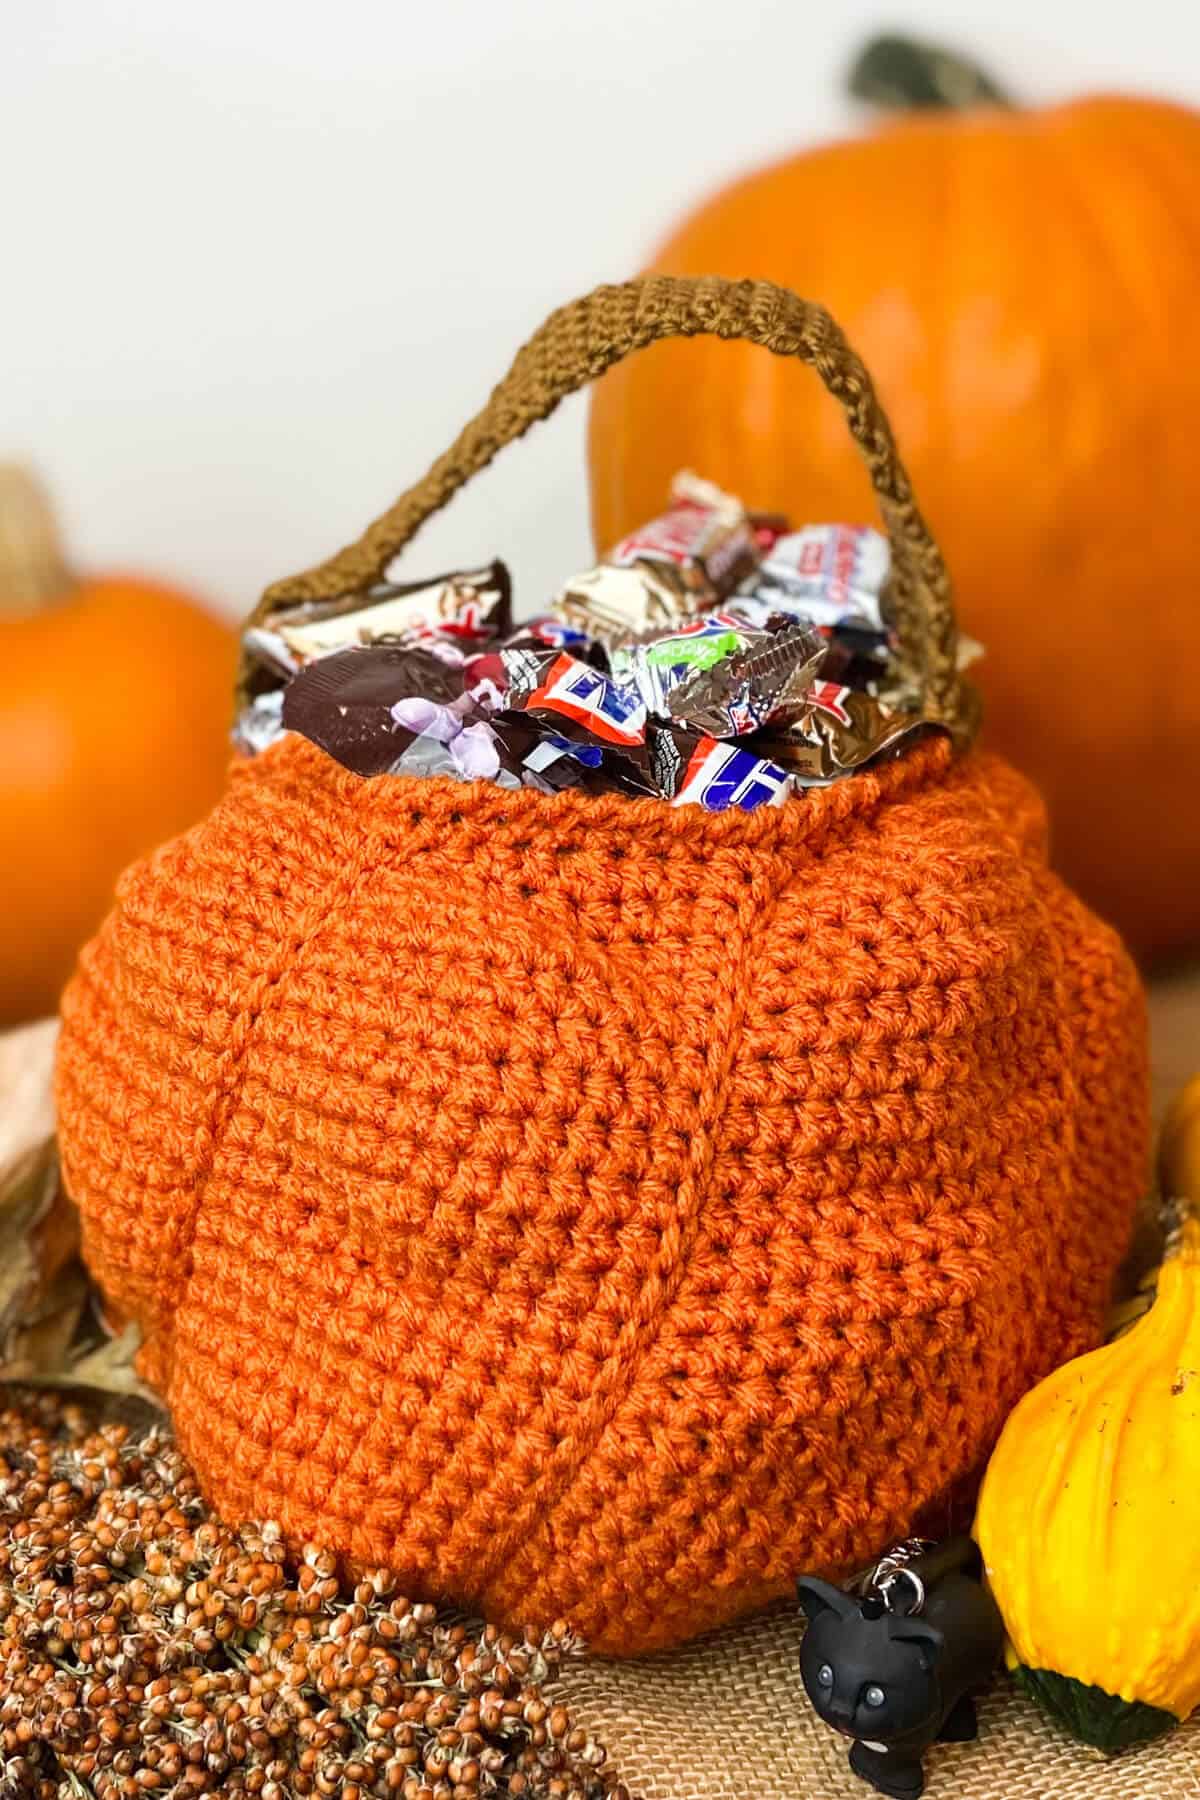 Bag with candy, with real pumpkins nearby